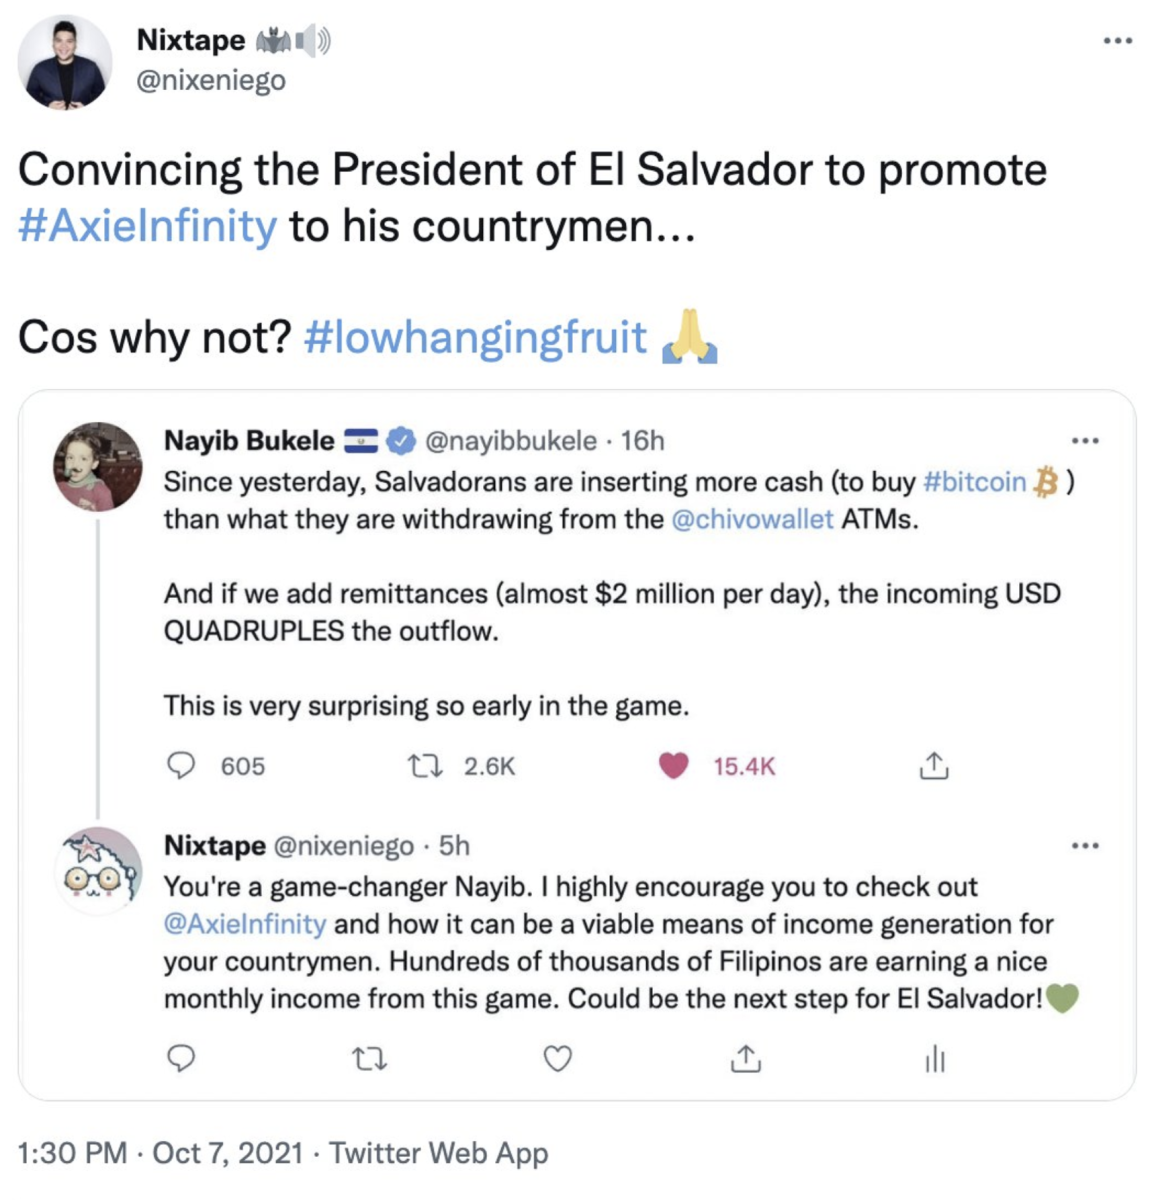 One year since making bitcoin legal tender in El Salvador, President Nayib Bukele has demonstrated sound money resilience.